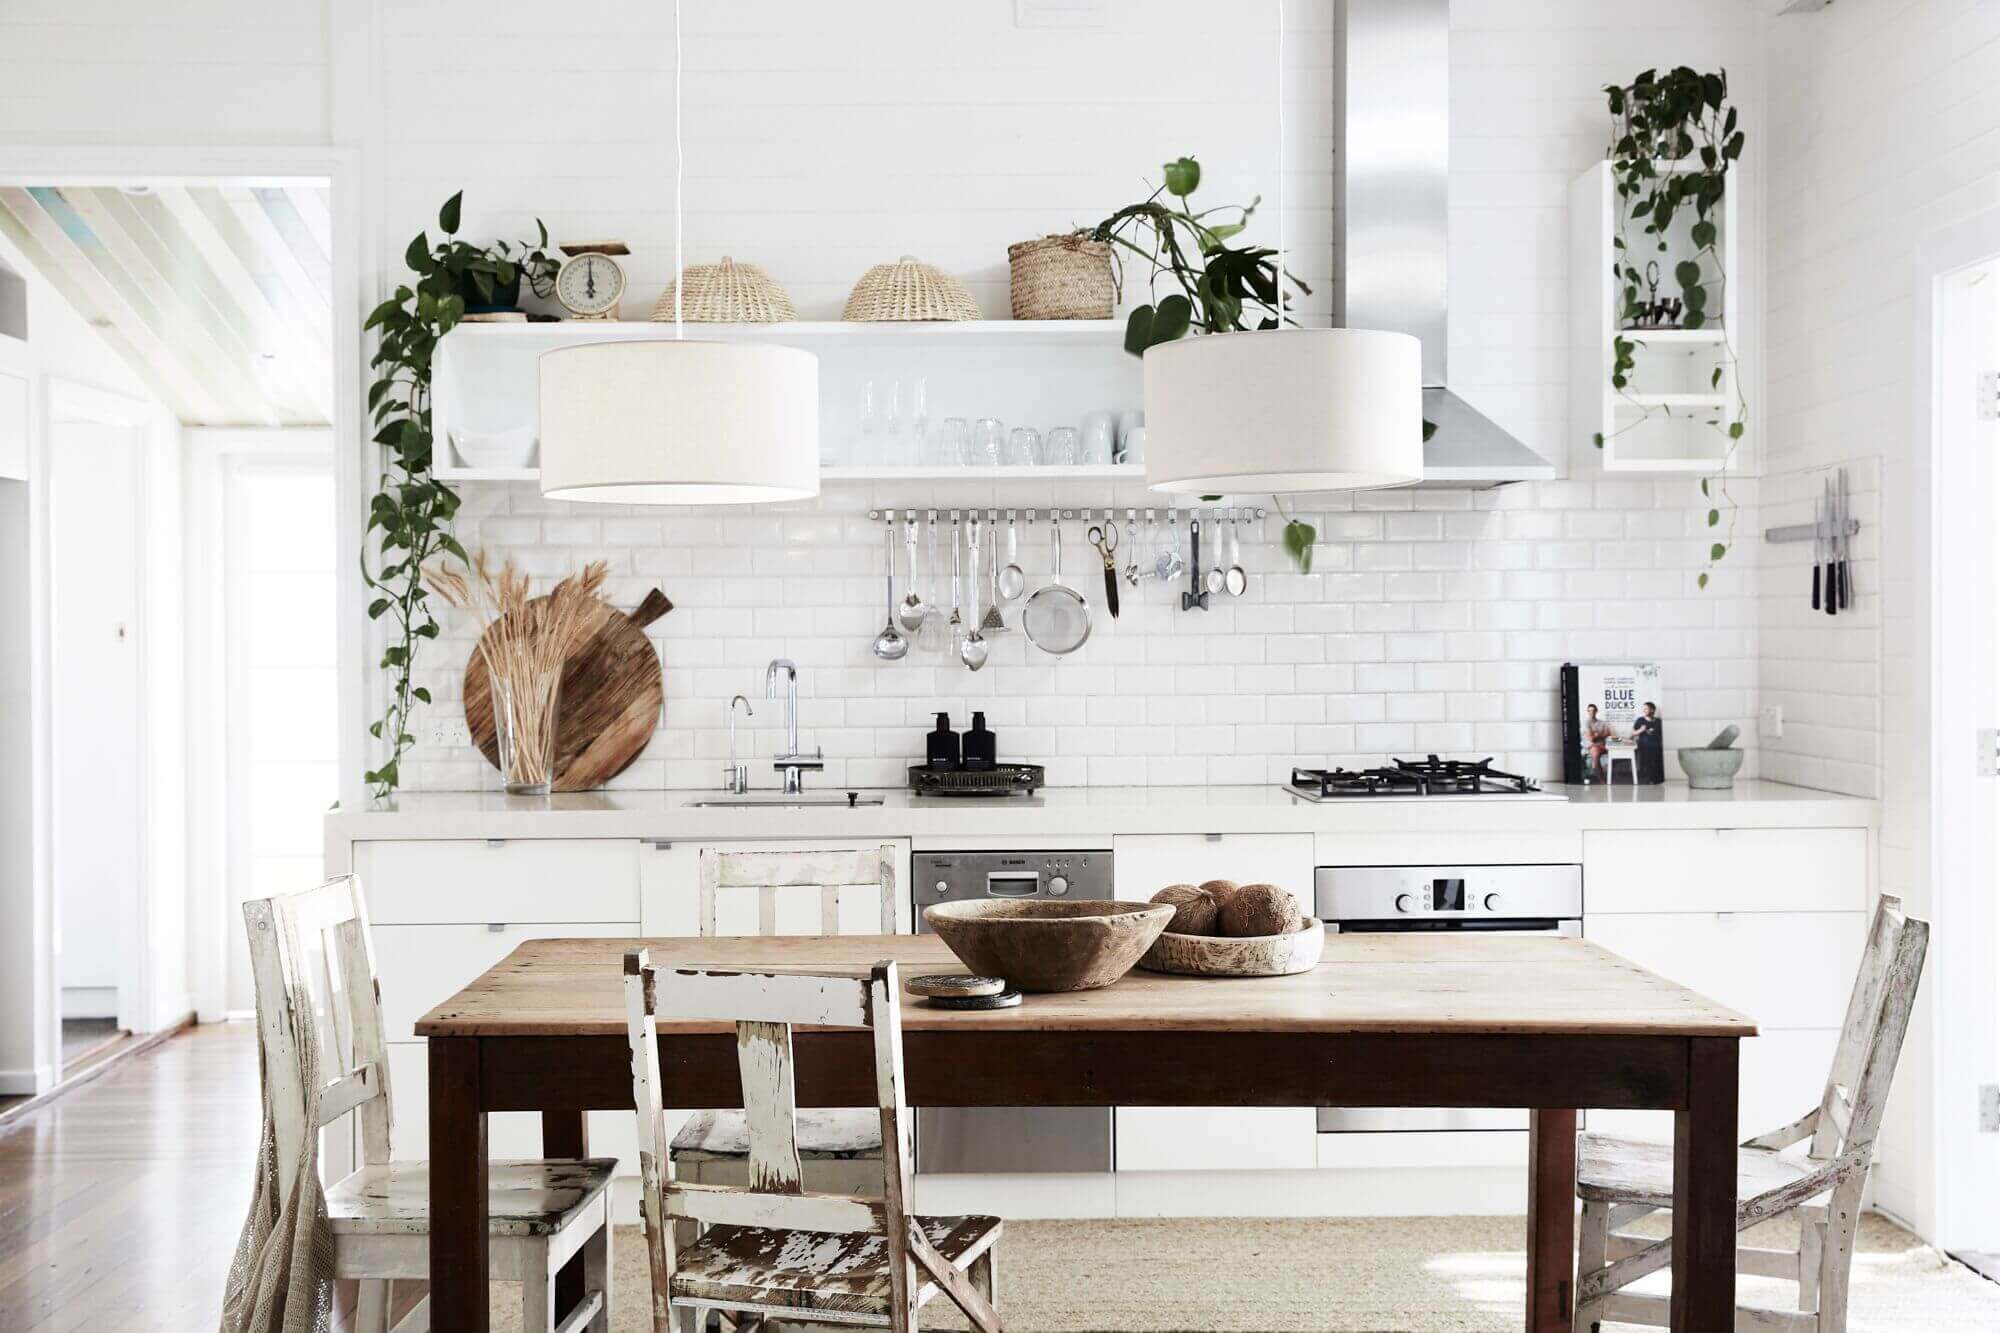 The Cottage, Byron Beach Abodes: Open plan kitchen with white subway tiles, rustic timber table, mixed chairs, open shelves and trailling greenery